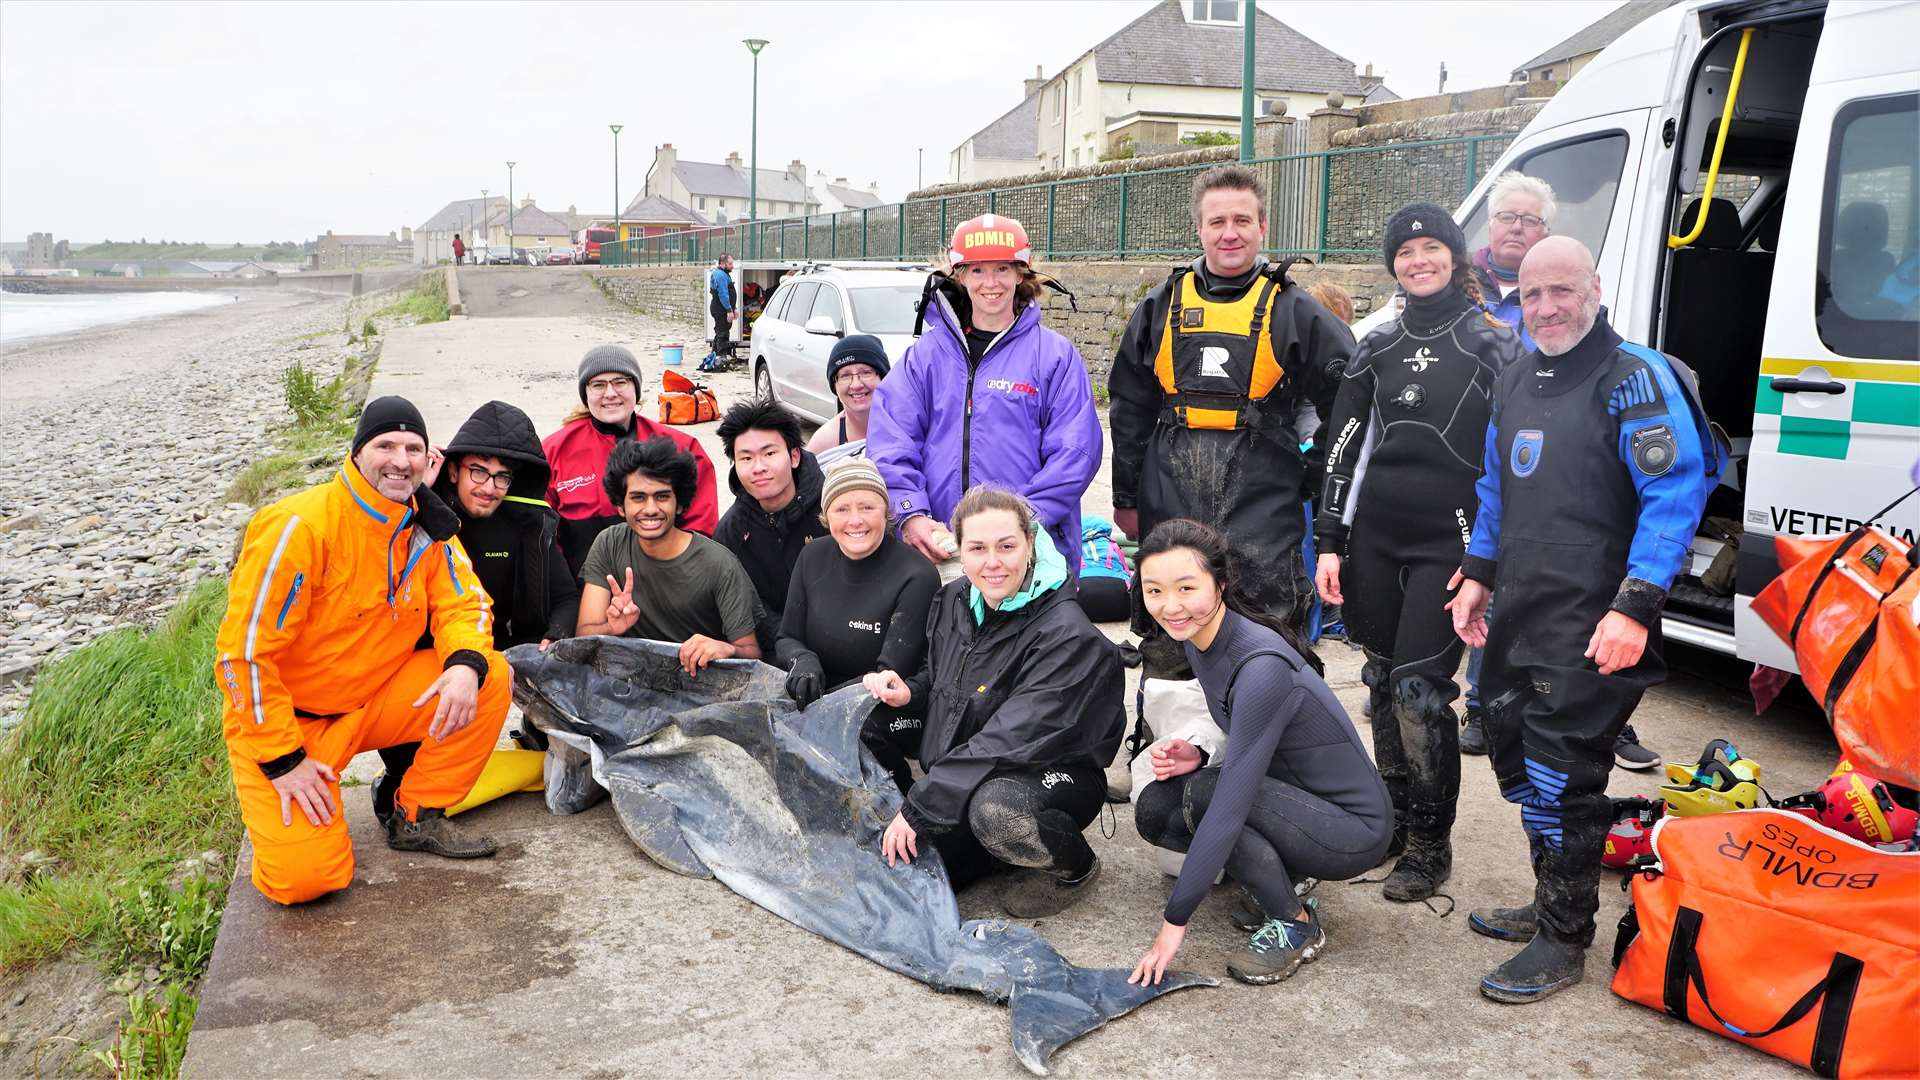 British Divers Marine Life Rescue volunteers at their training session in Thurso on Sunday. Picture: DGS